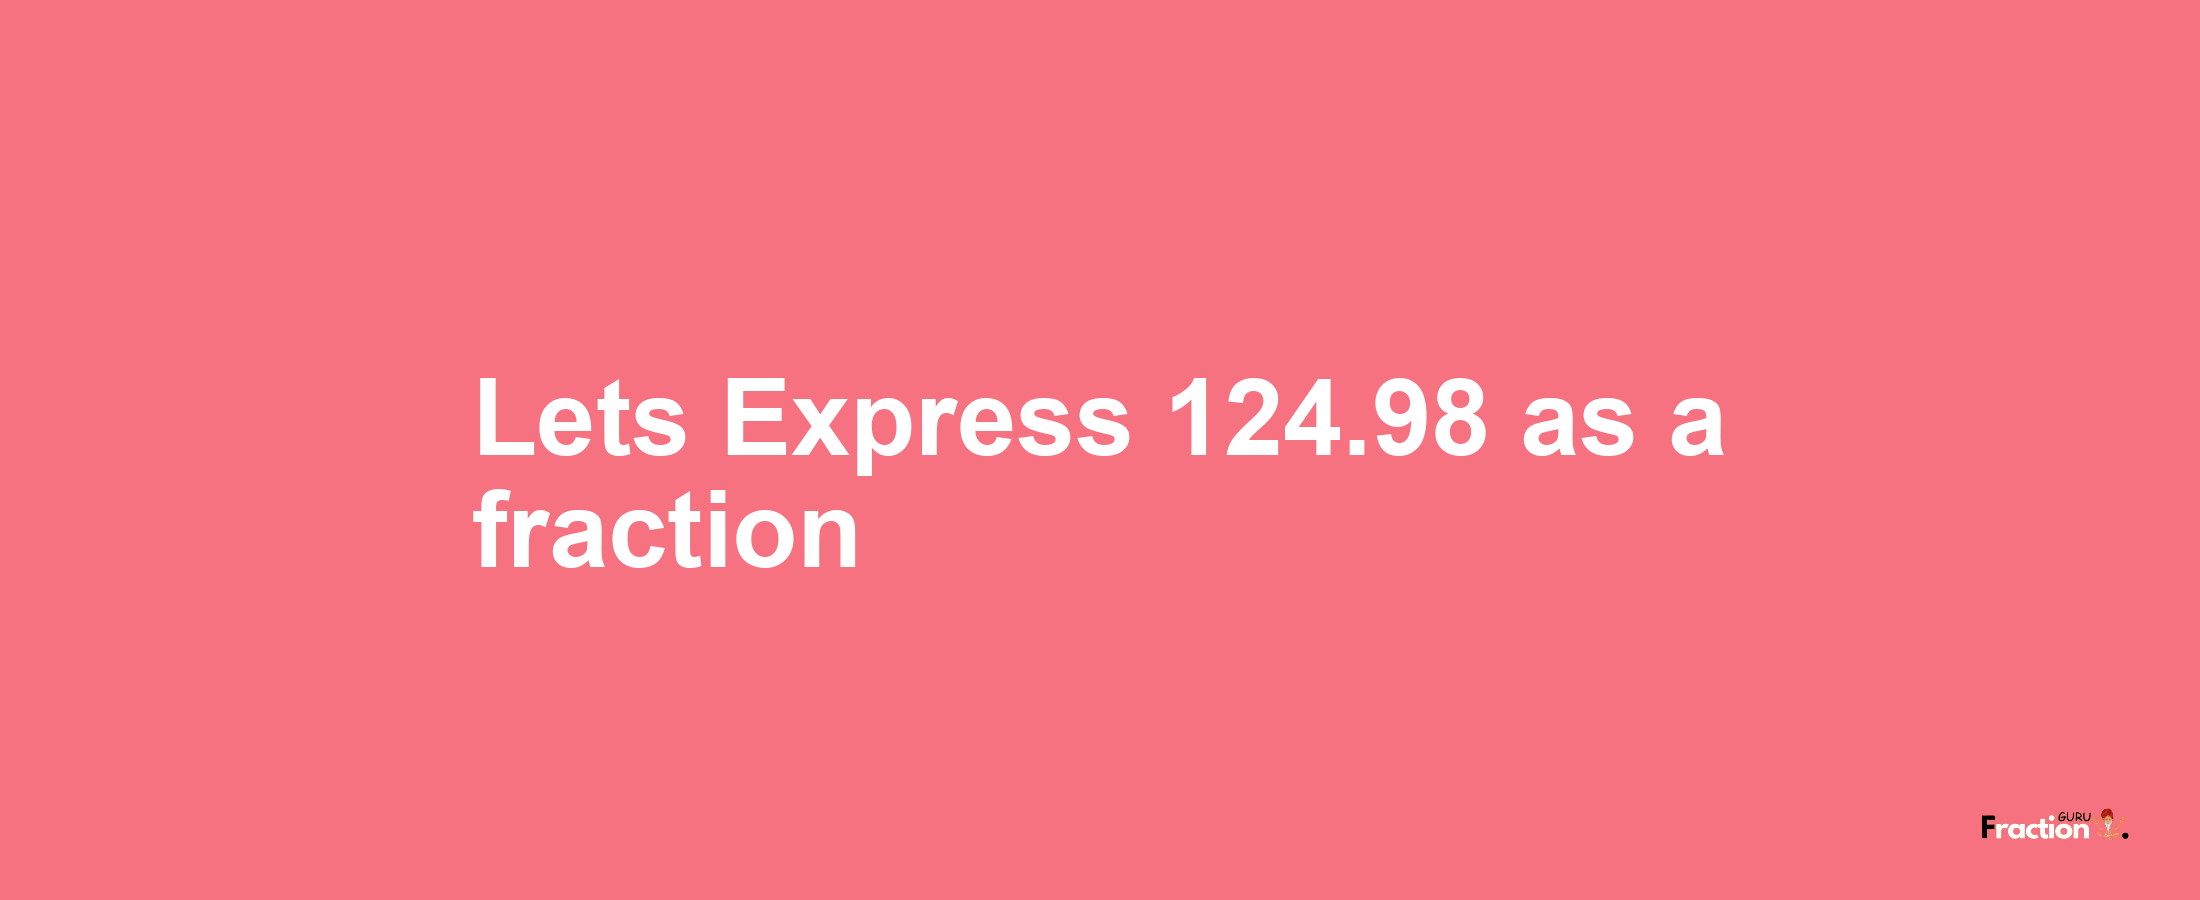 Lets Express 124.98 as afraction